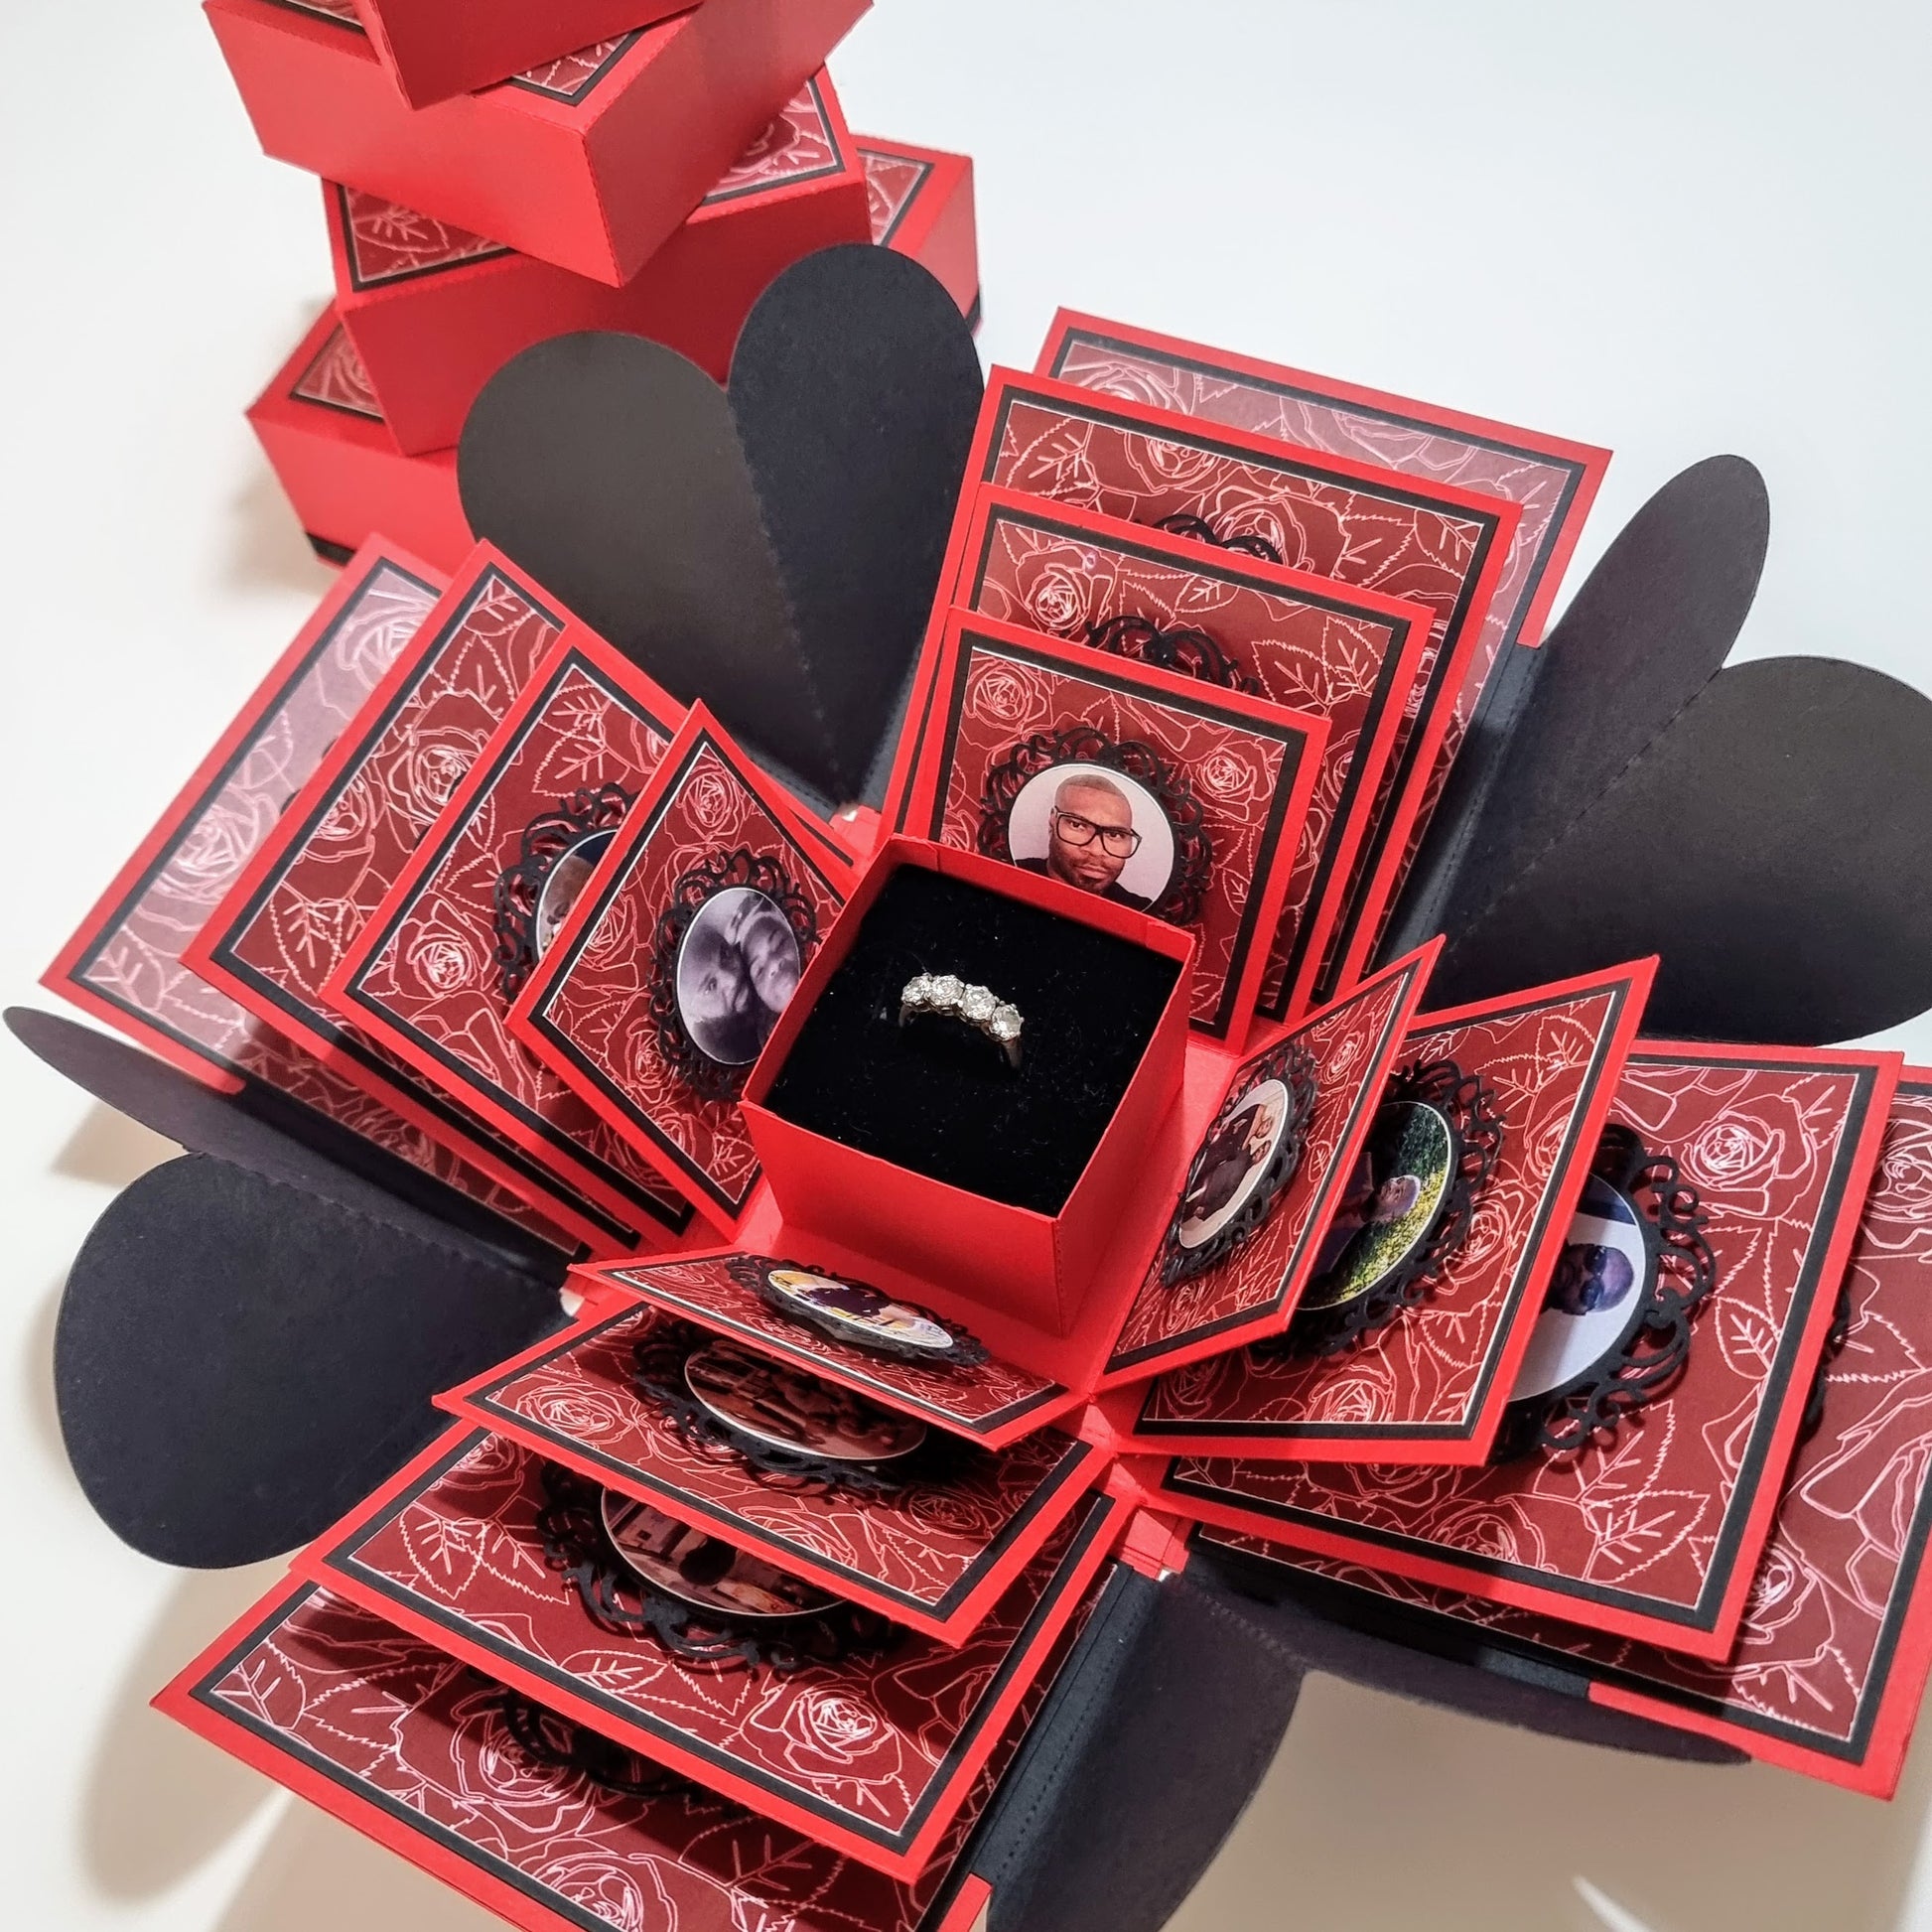 Red and Black Hearts and Roses Proposal Ring and photo box - will you marry me